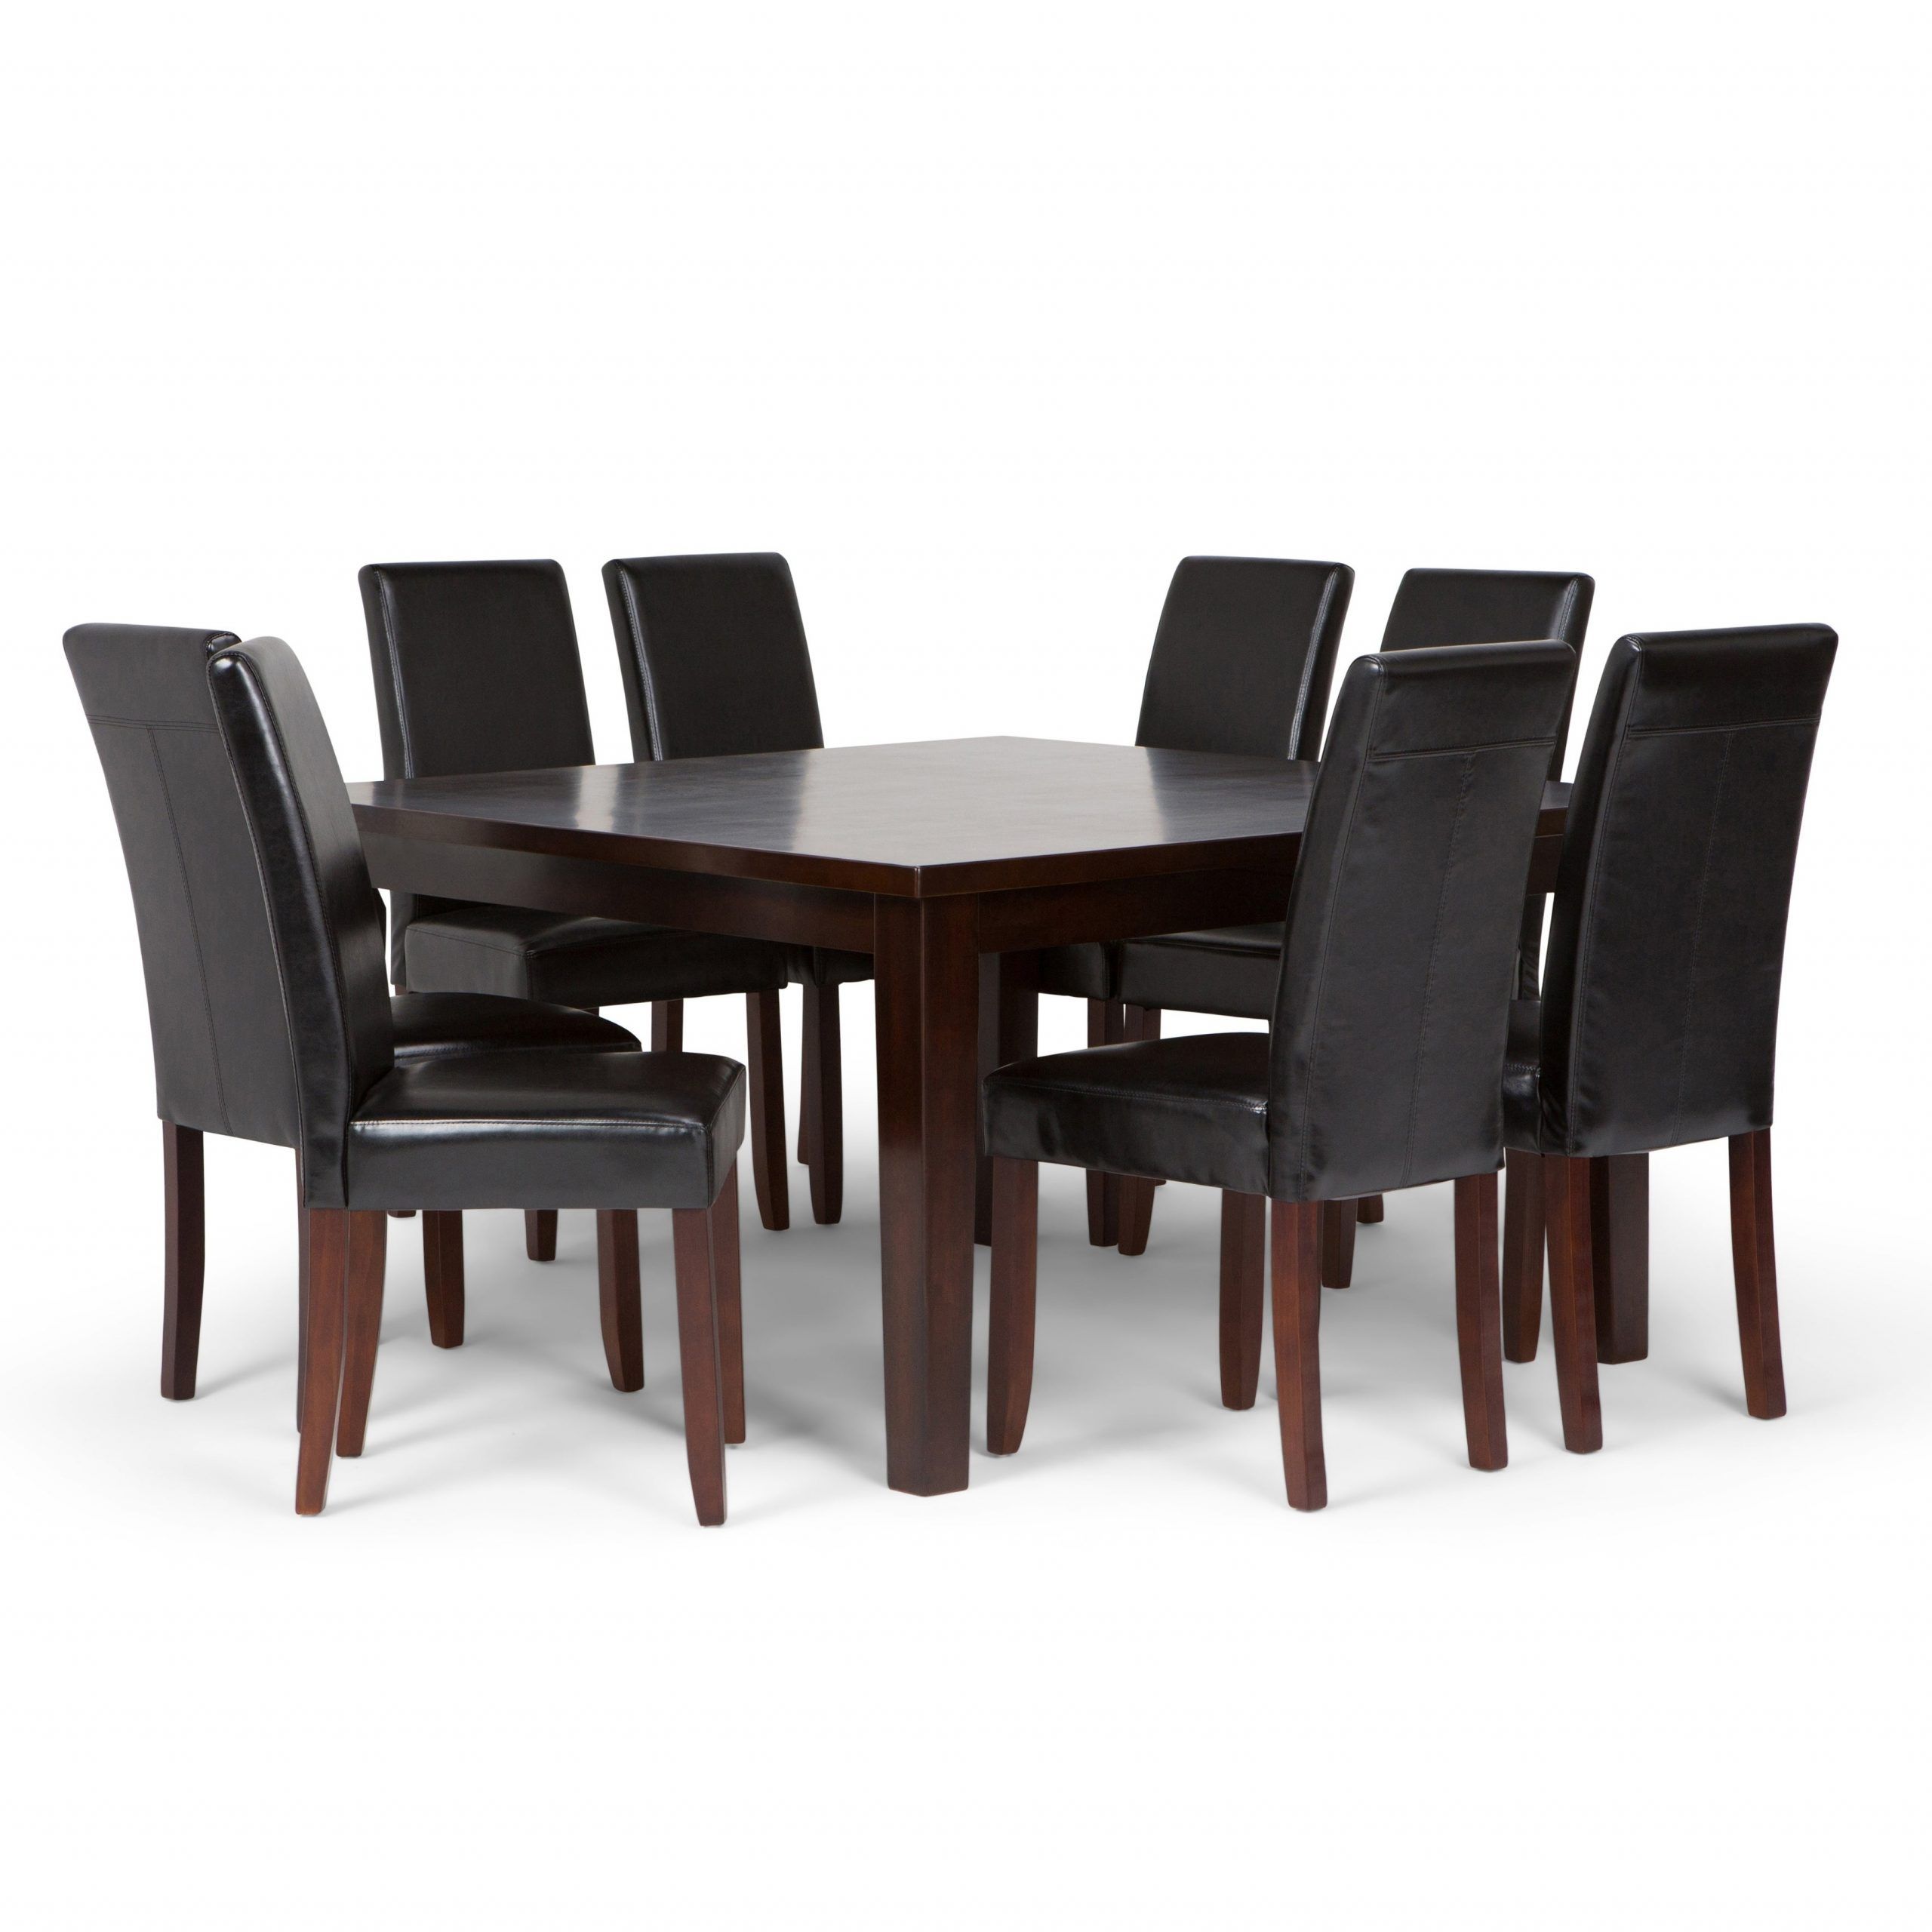 Wyndenhall Normandy Contemporary 9 Pc Dining Set With 8 Upholstered Parson  Chairs And 54 Inch Wide Table Intended For 2019 Normandy Extending Dining Tables (View 15 of 25)